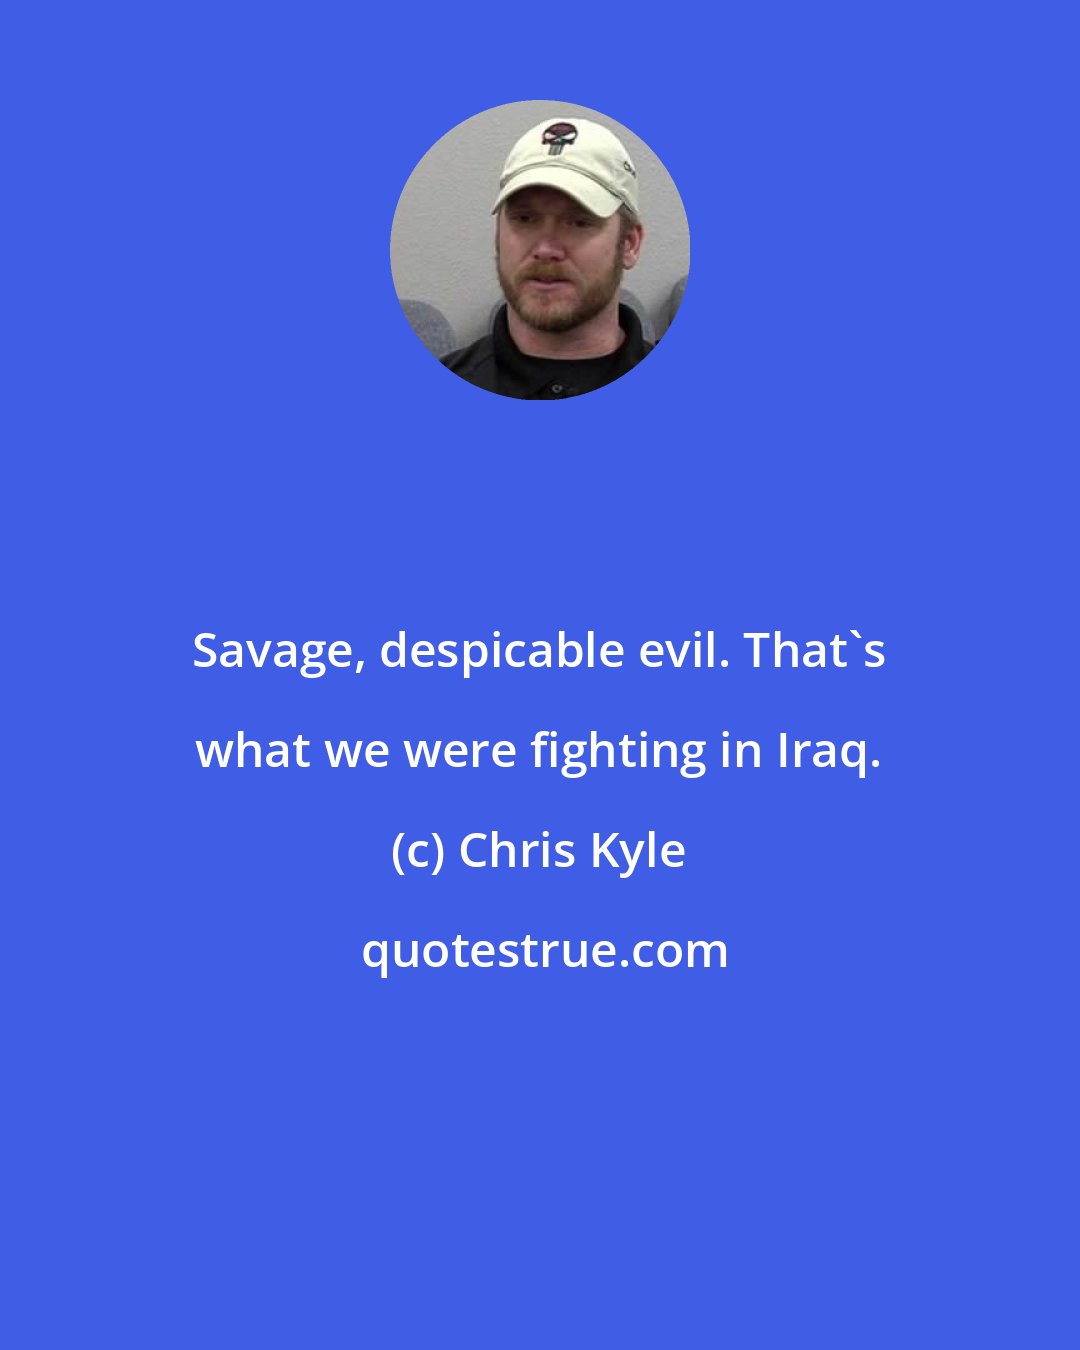 Chris Kyle: Savage, despicable evil. That's what we were fighting in Iraq.